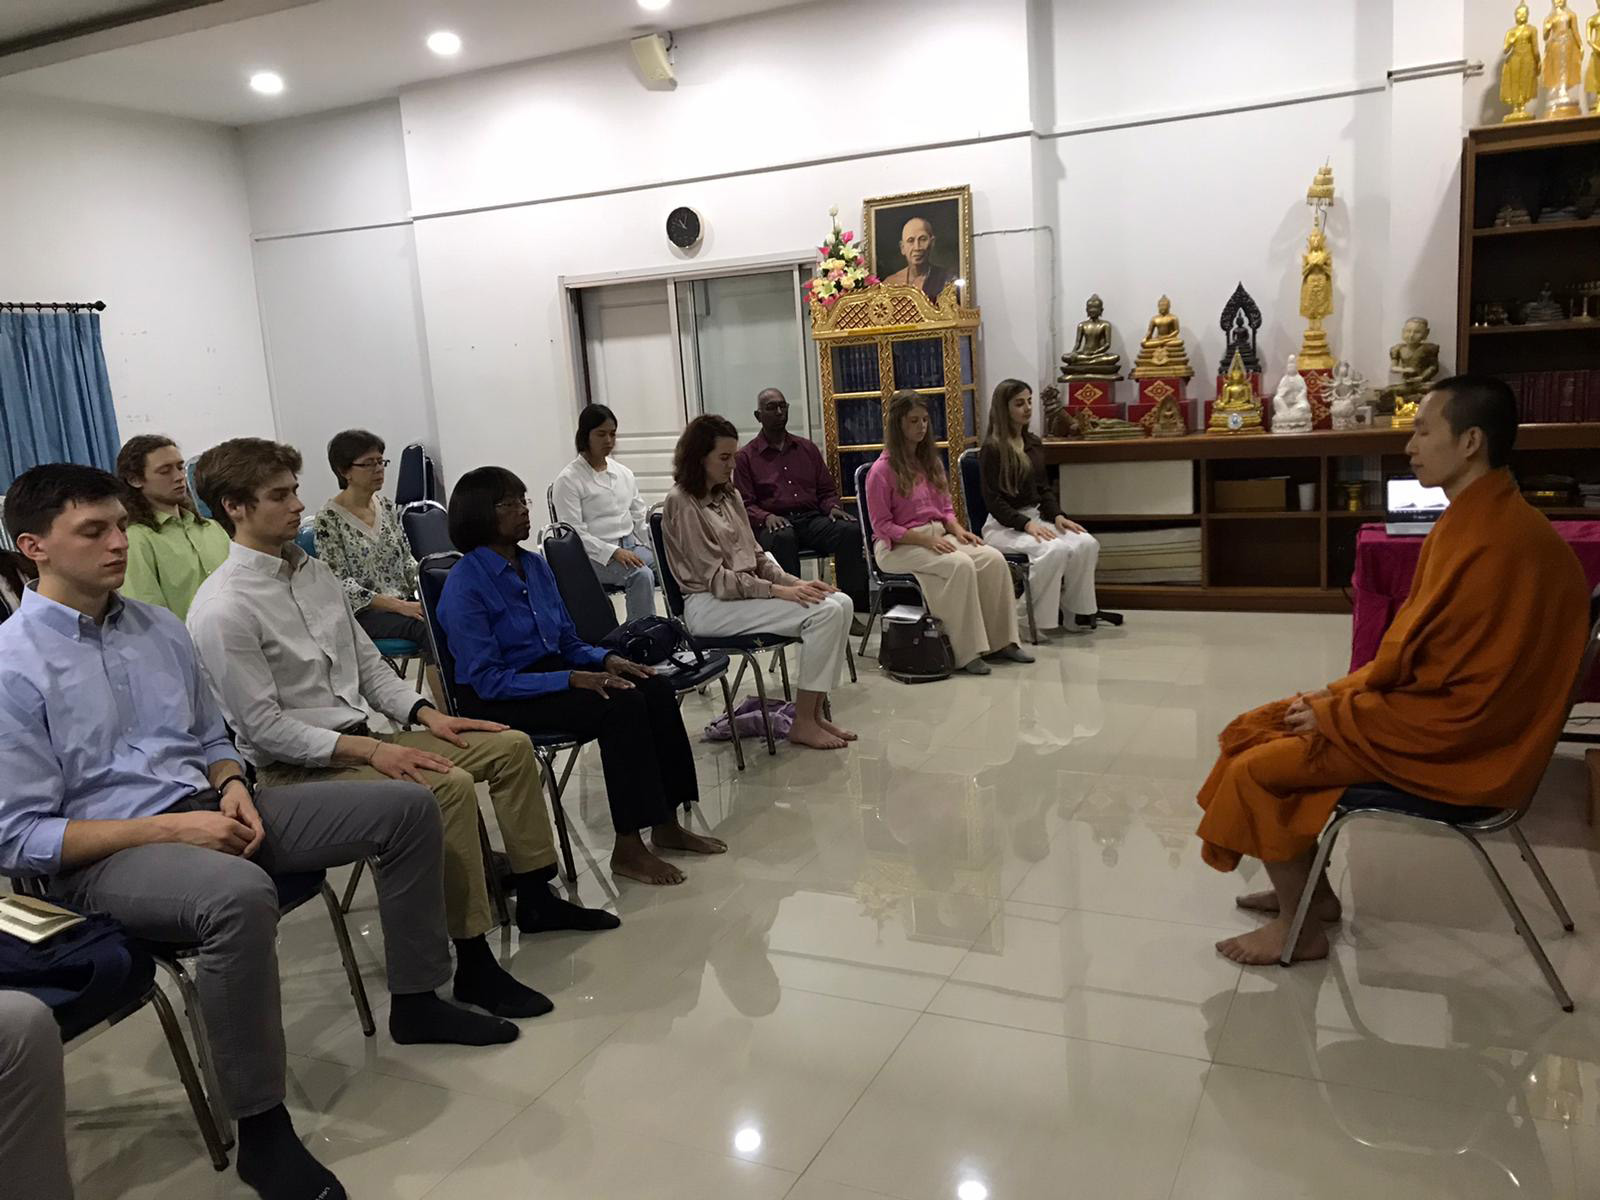 During the monk chat he led us in meditation in order to practice clearing the mind and focusing on our breathing in order to notice the little rhythms of our bodies that we may not have noticed before.